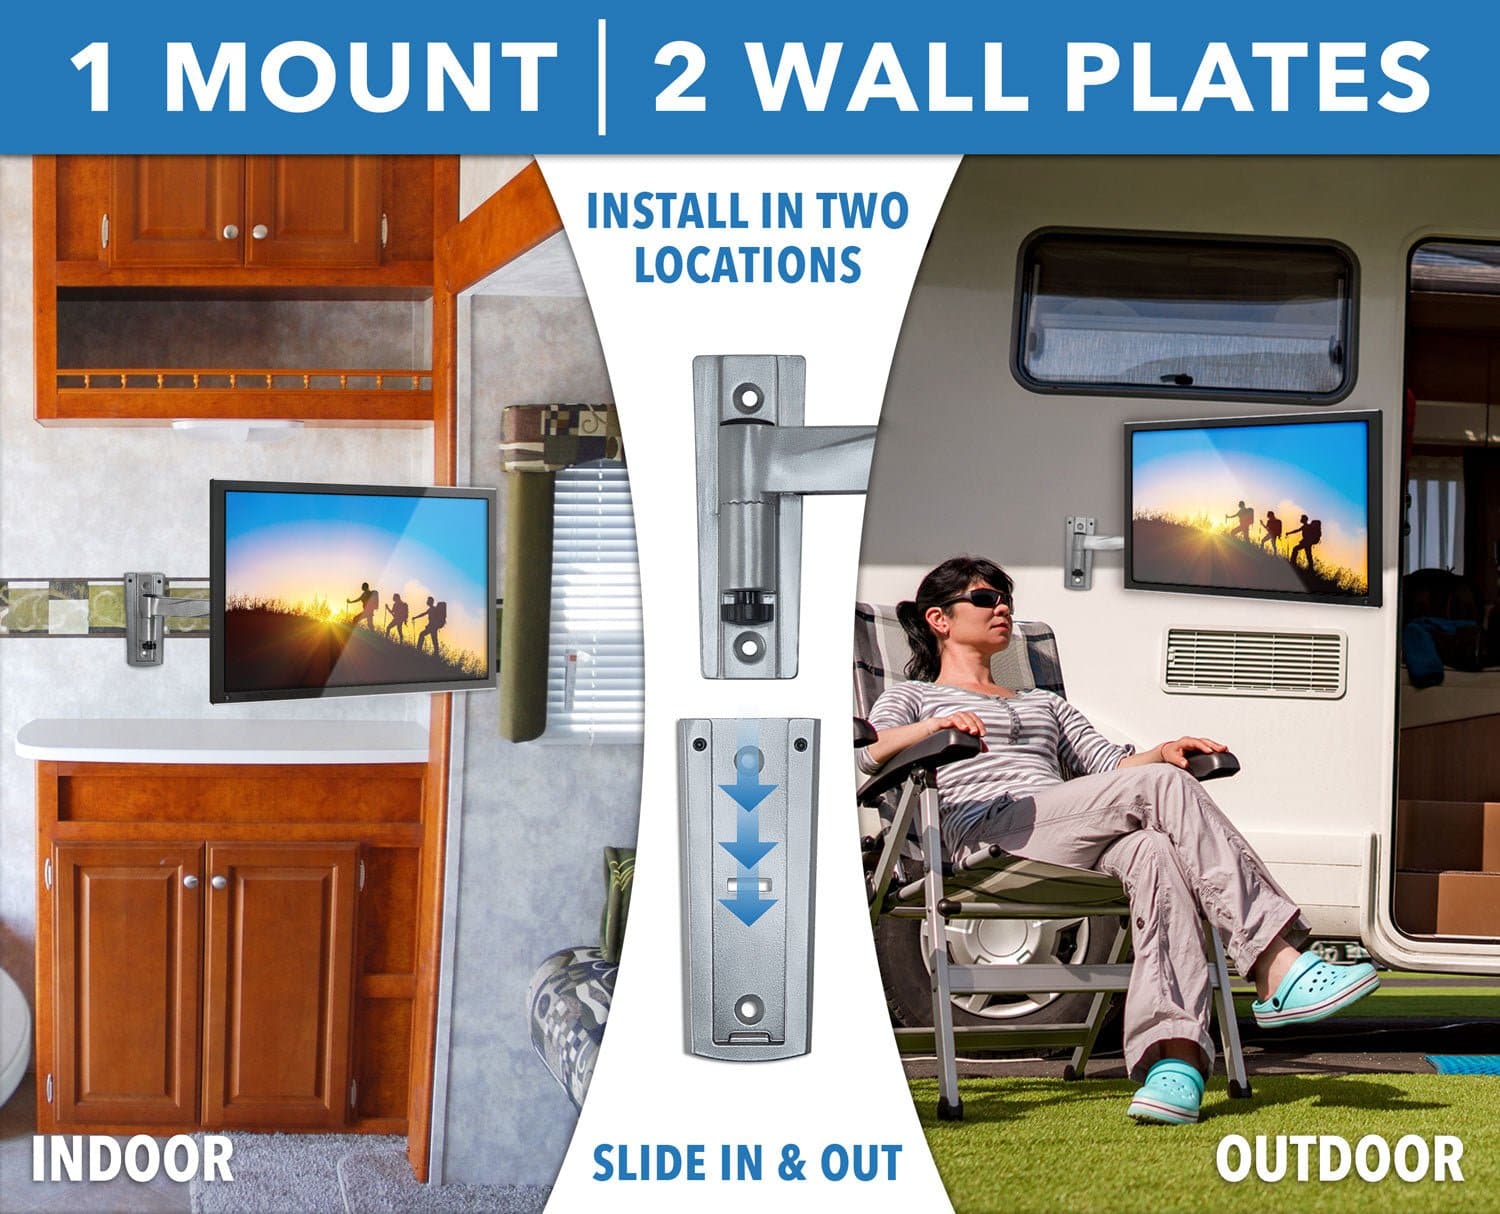 Full Motion Lockable RV and Trailer TV Mount - Mount-It!